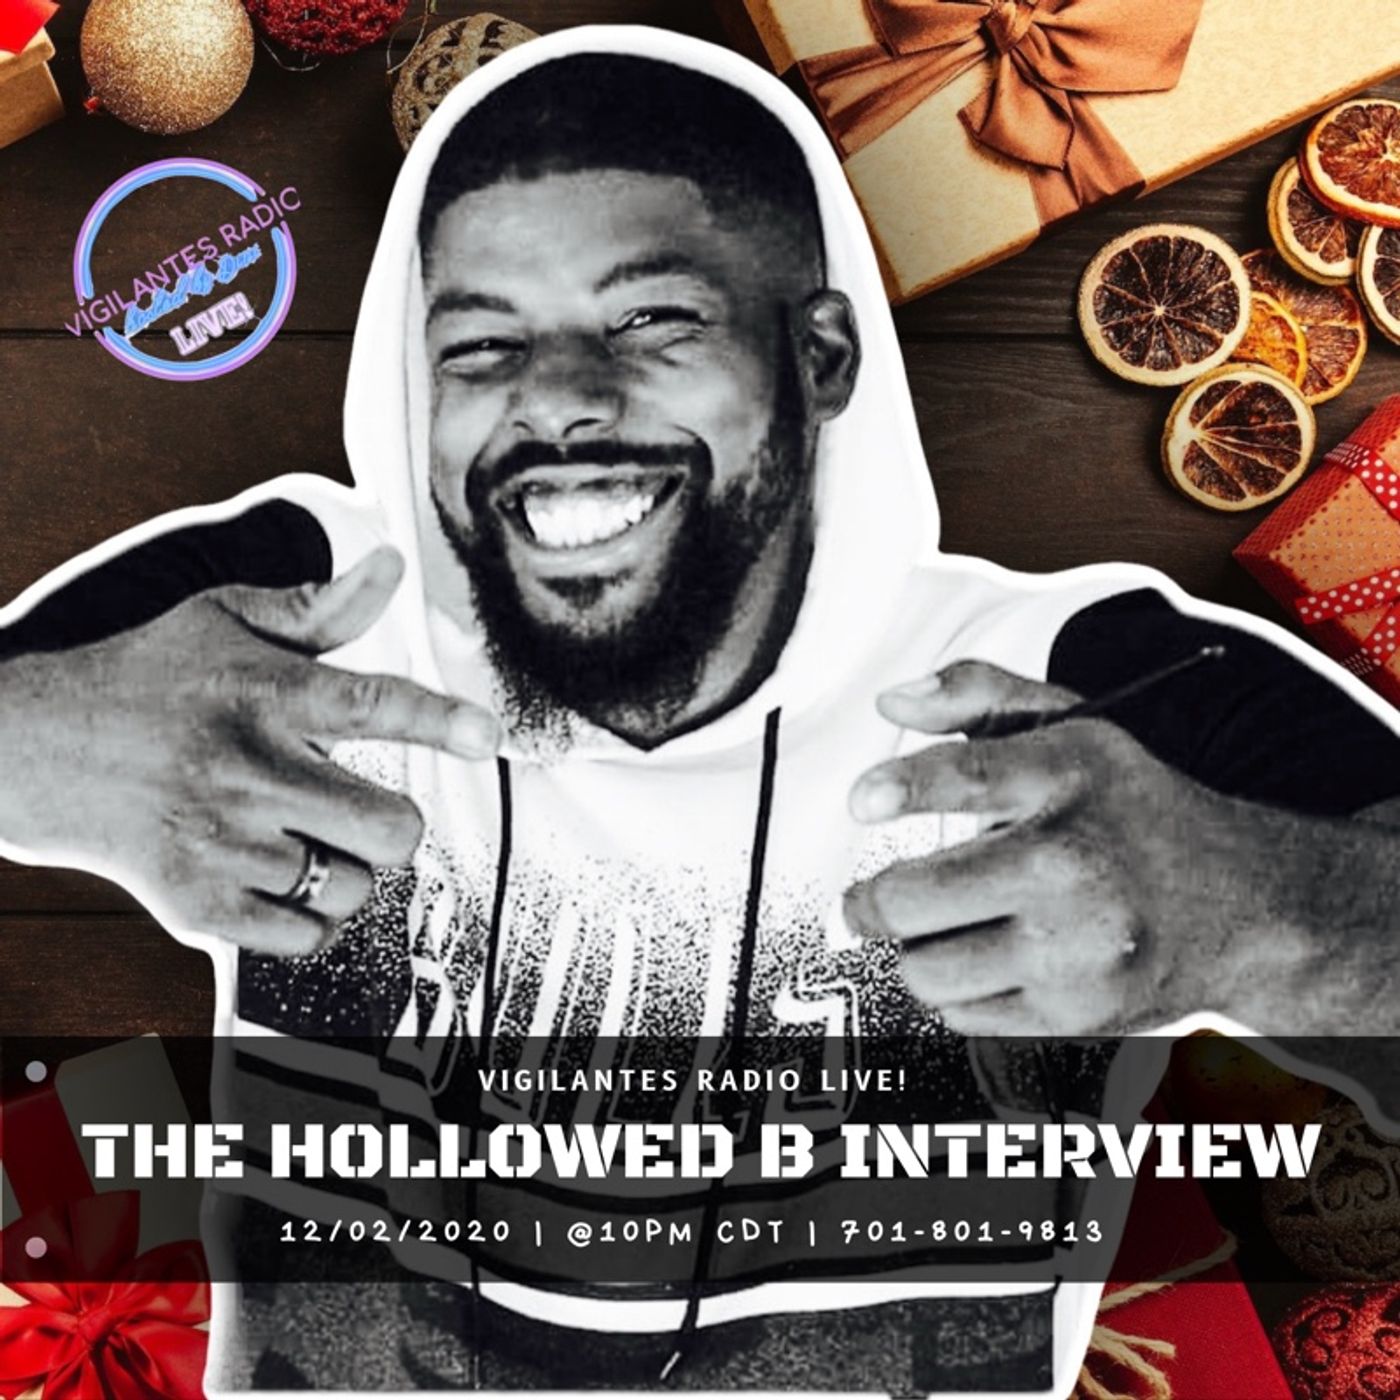 The Hollowed B Interview. Image